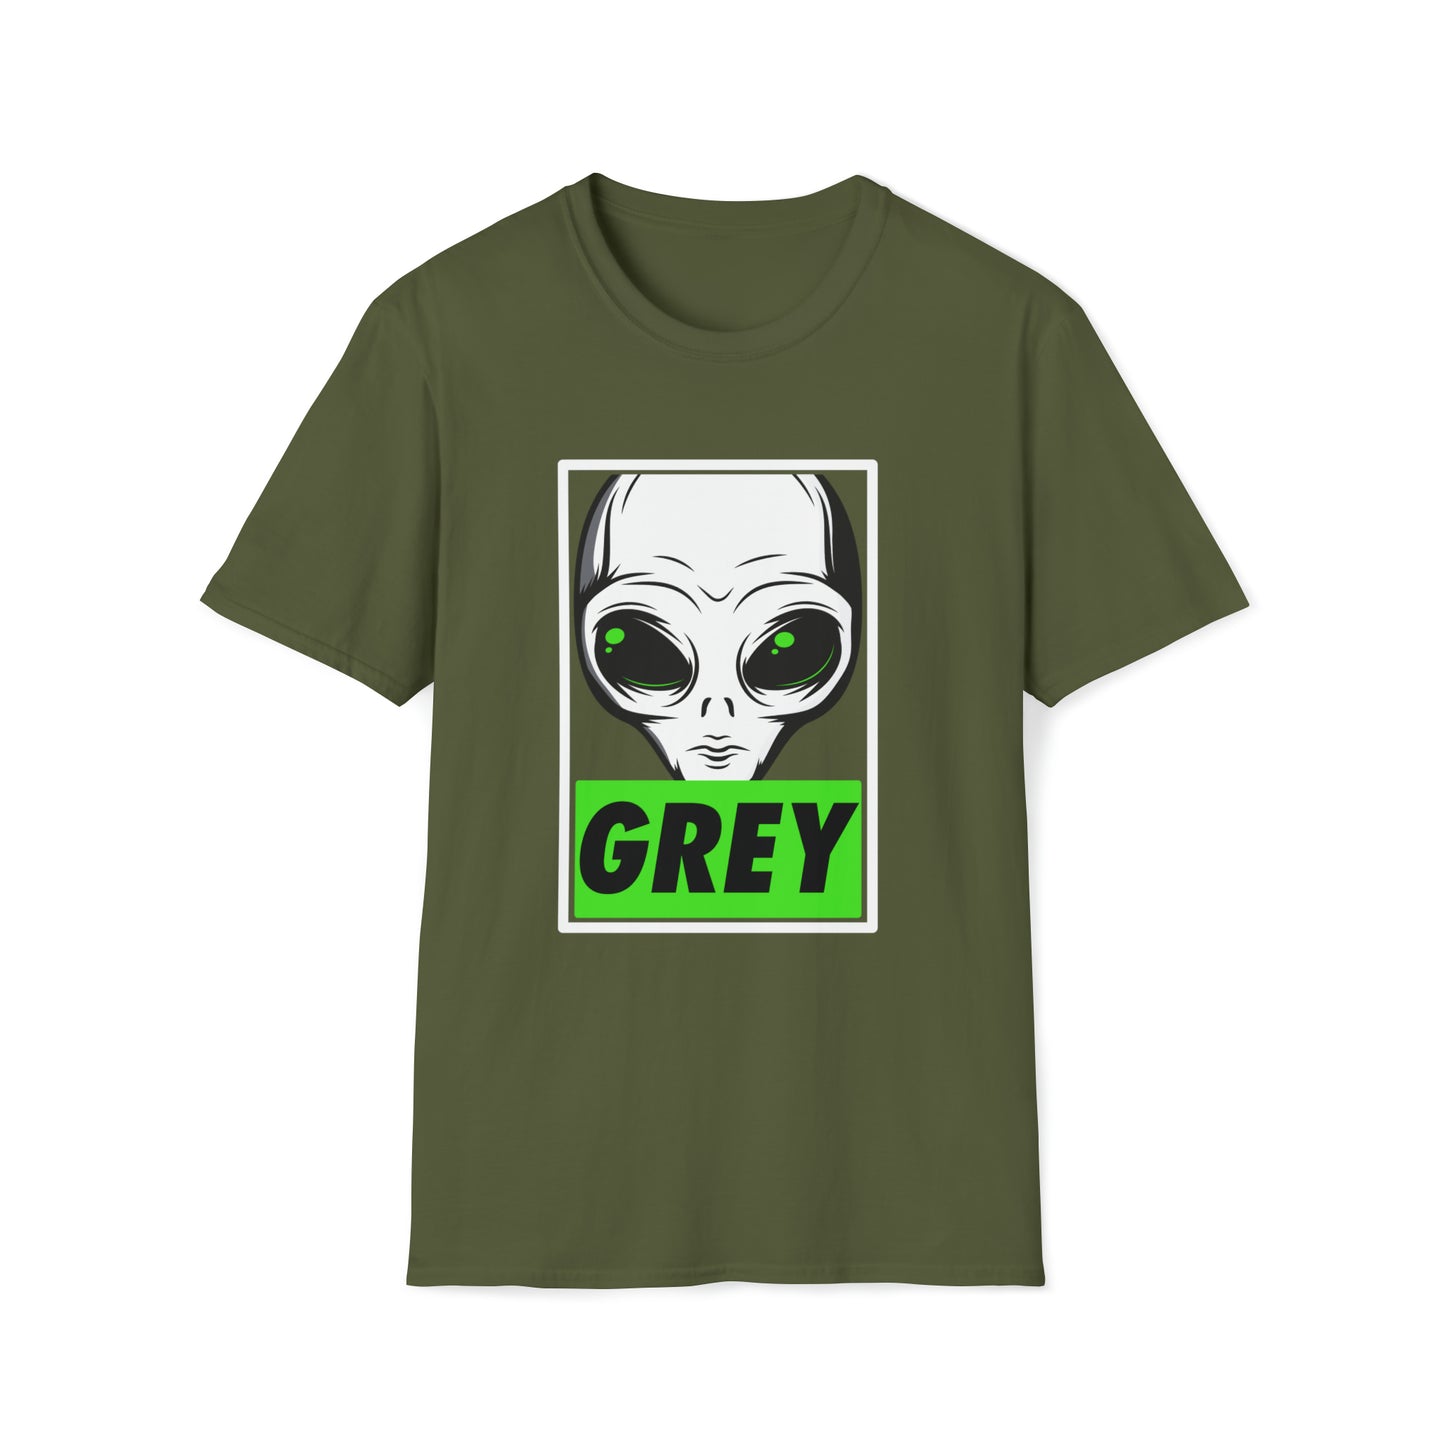 Obey the Greys Tee - Unisex